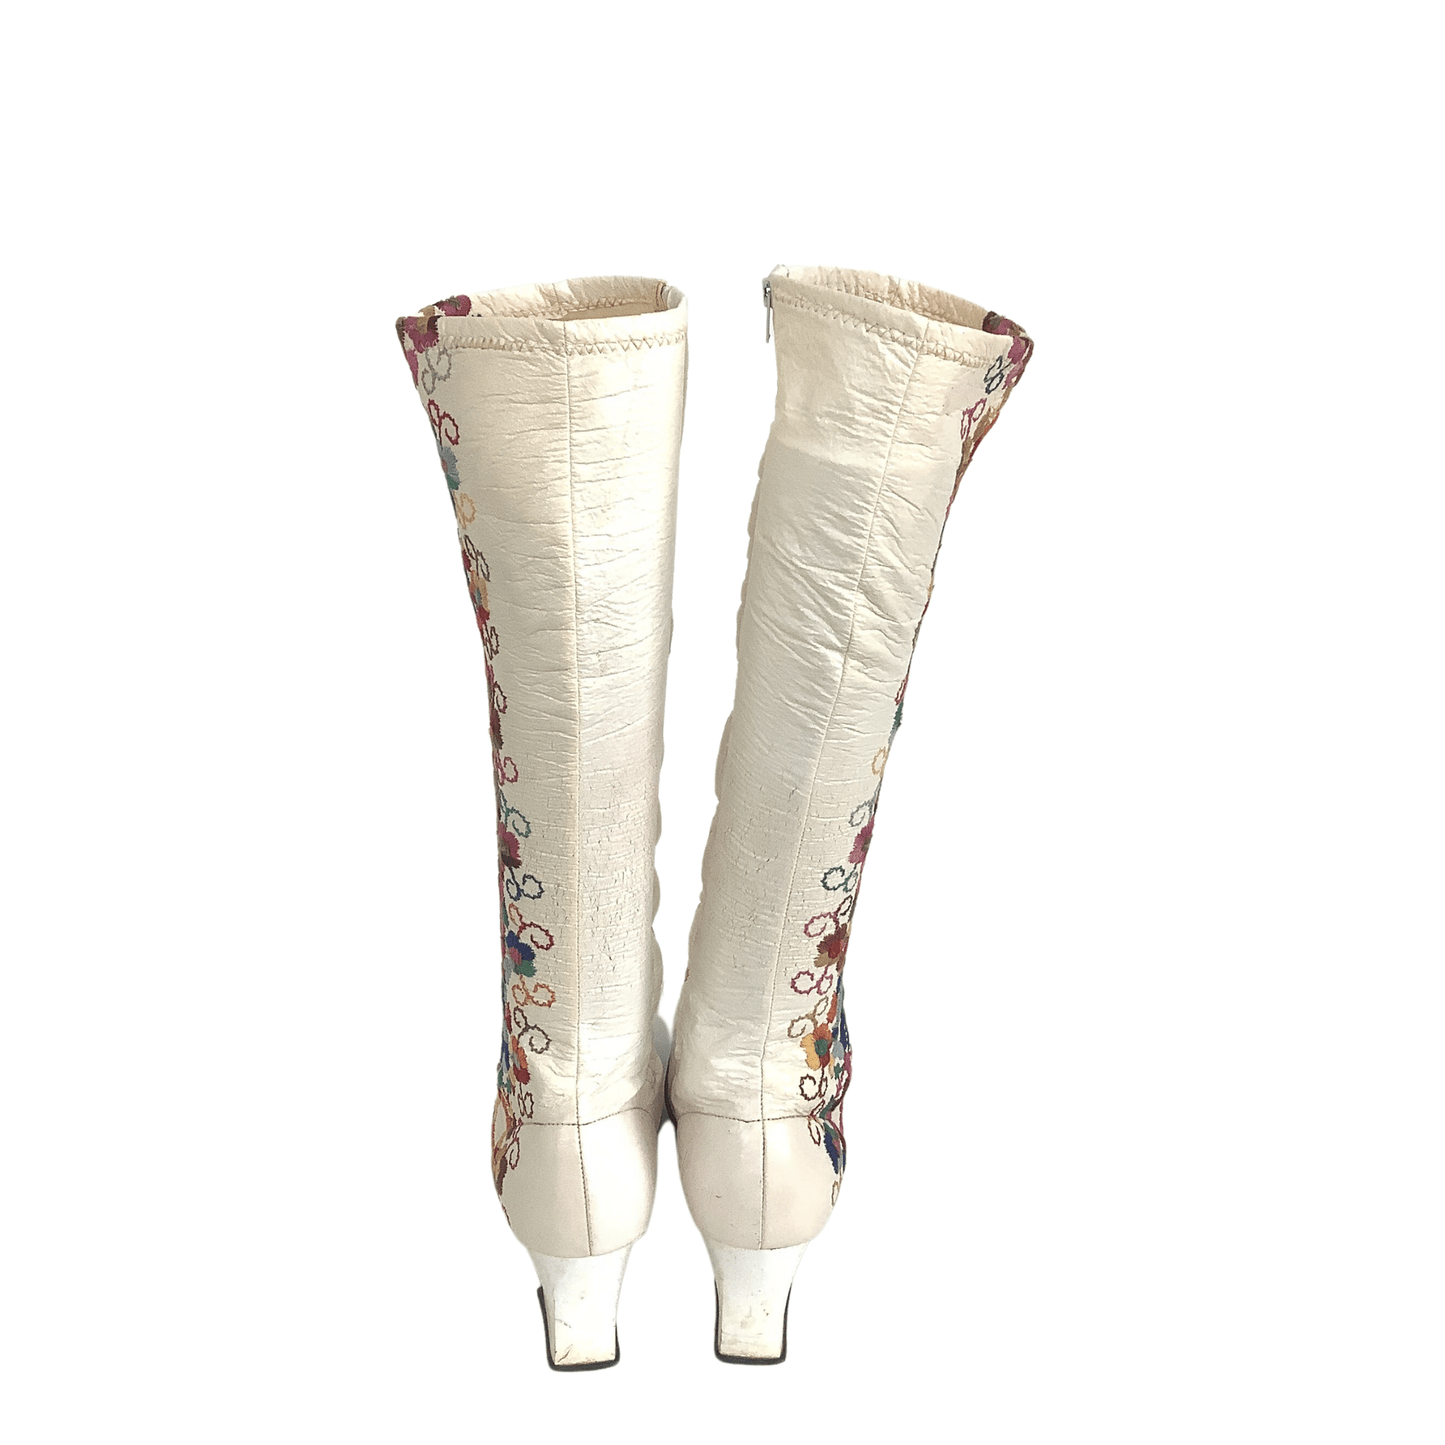 1960s Embroidered Boots 7.5 / Multi / Vintage 1960s